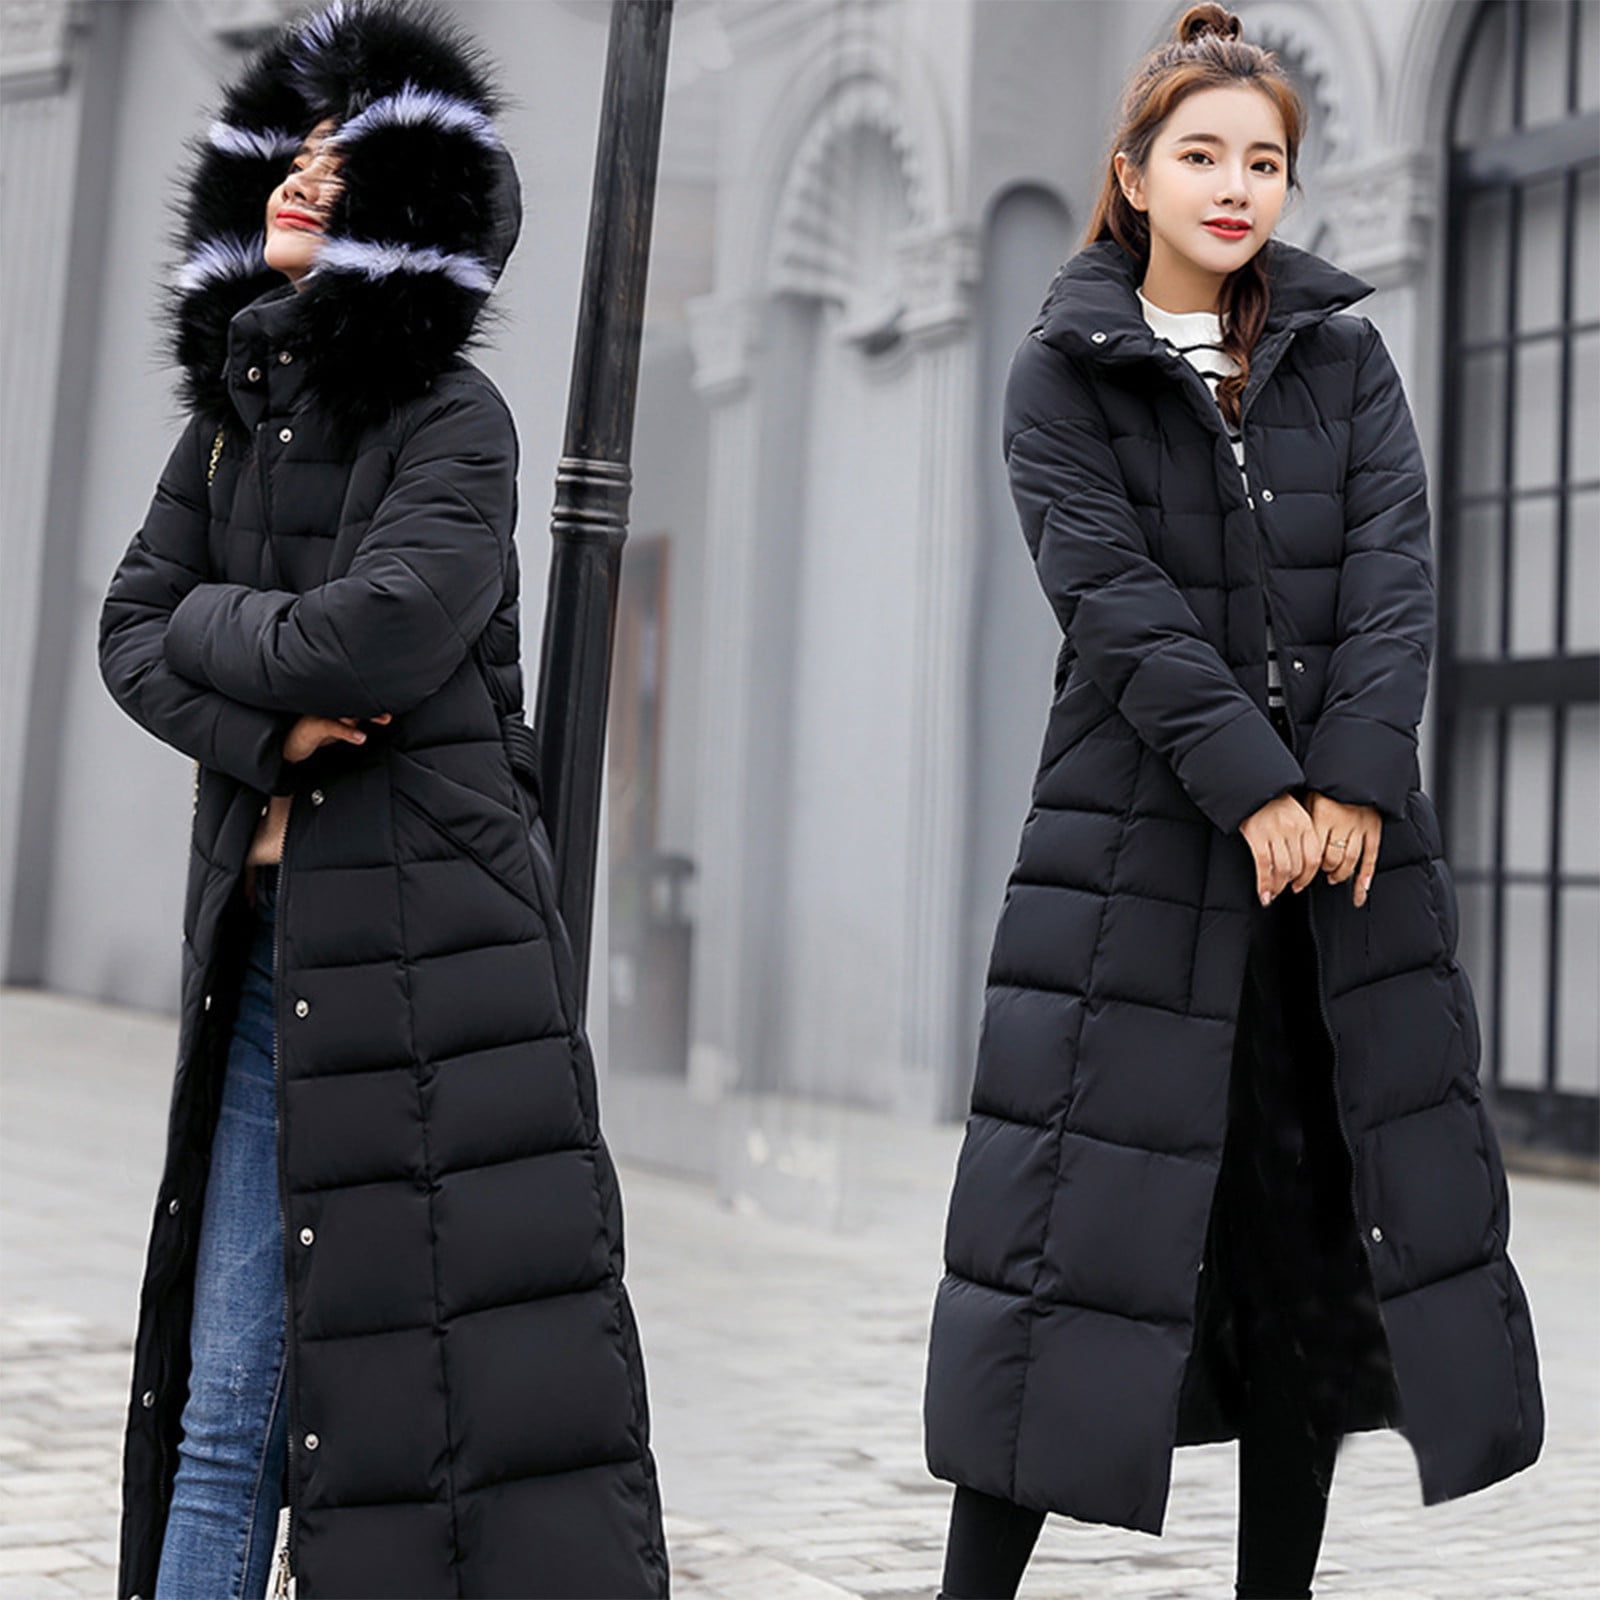 Women's Winter Coats Heavyweight Full Length Fleece Lined Maxi Puffer  Hooded Long Coat Reduced Price and Promotions